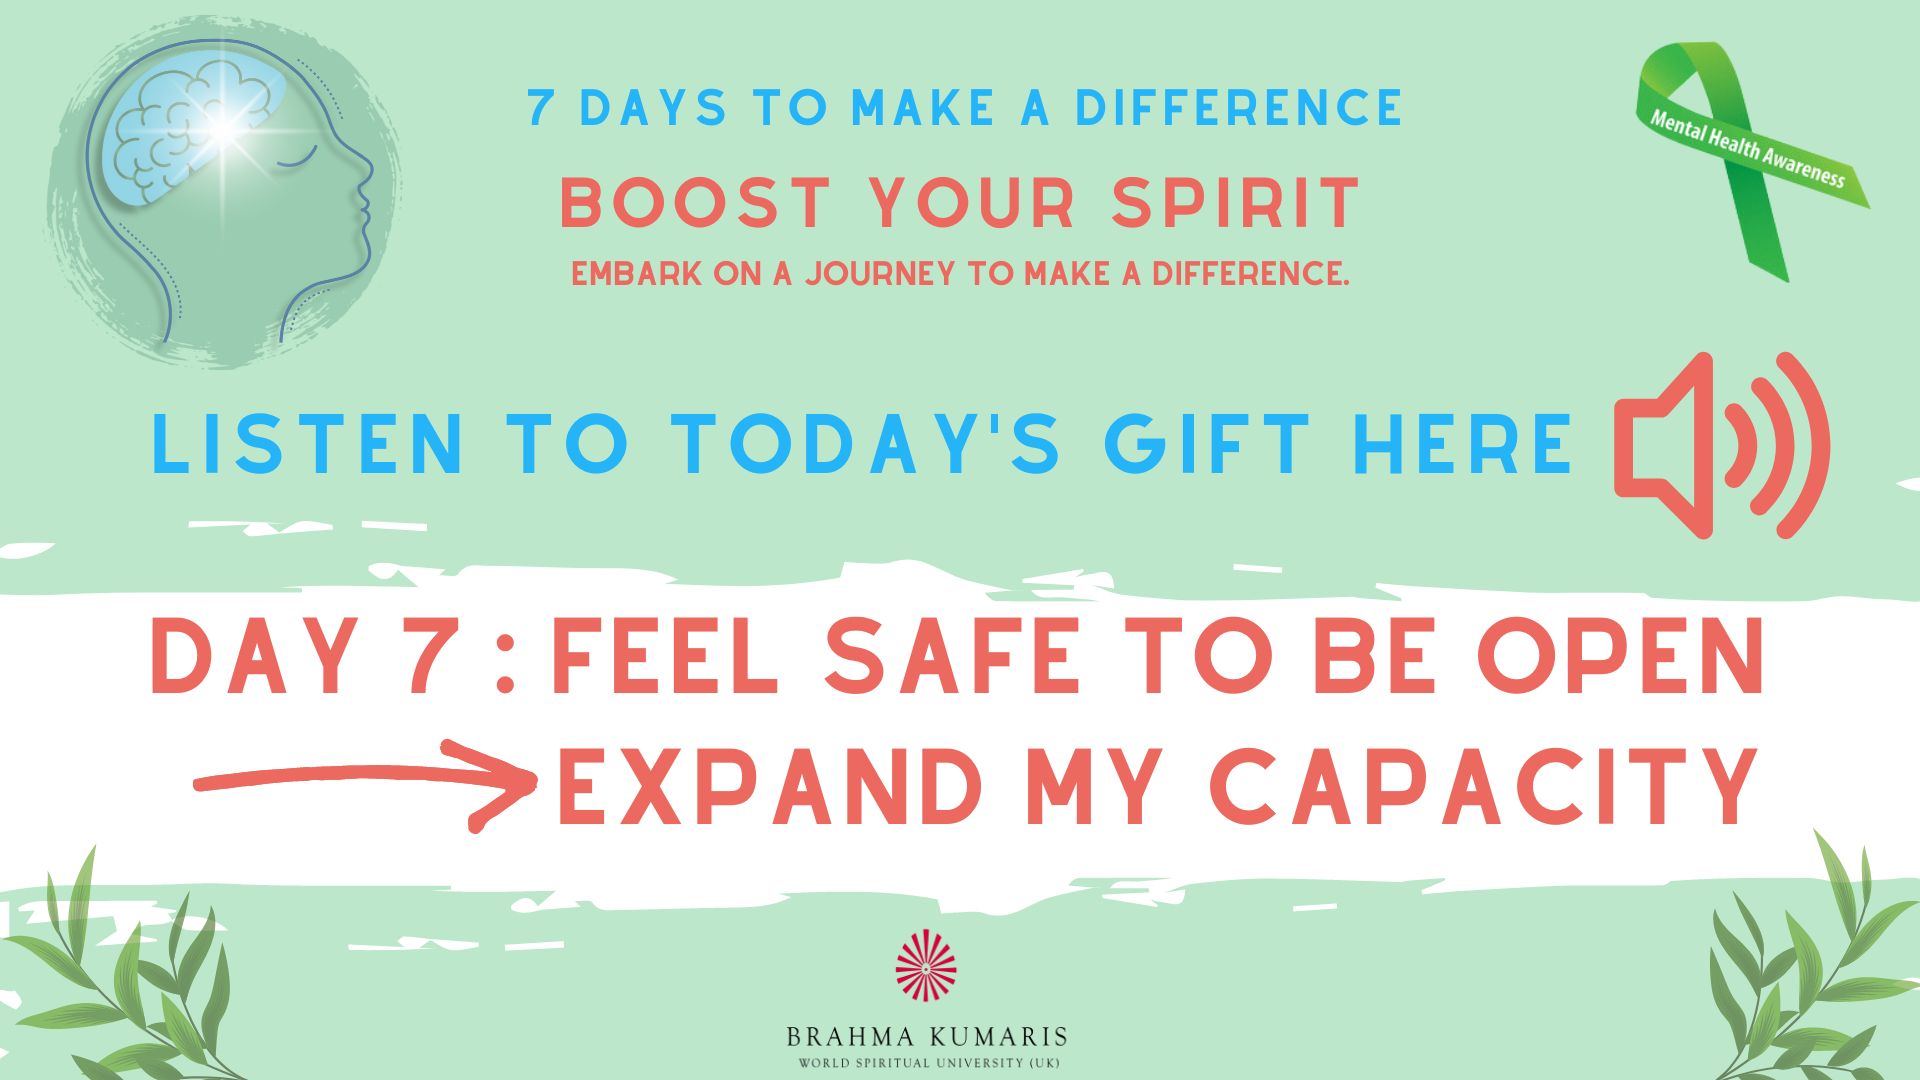 Day 7: Feel Safe To Be Open - Expand My Capacity